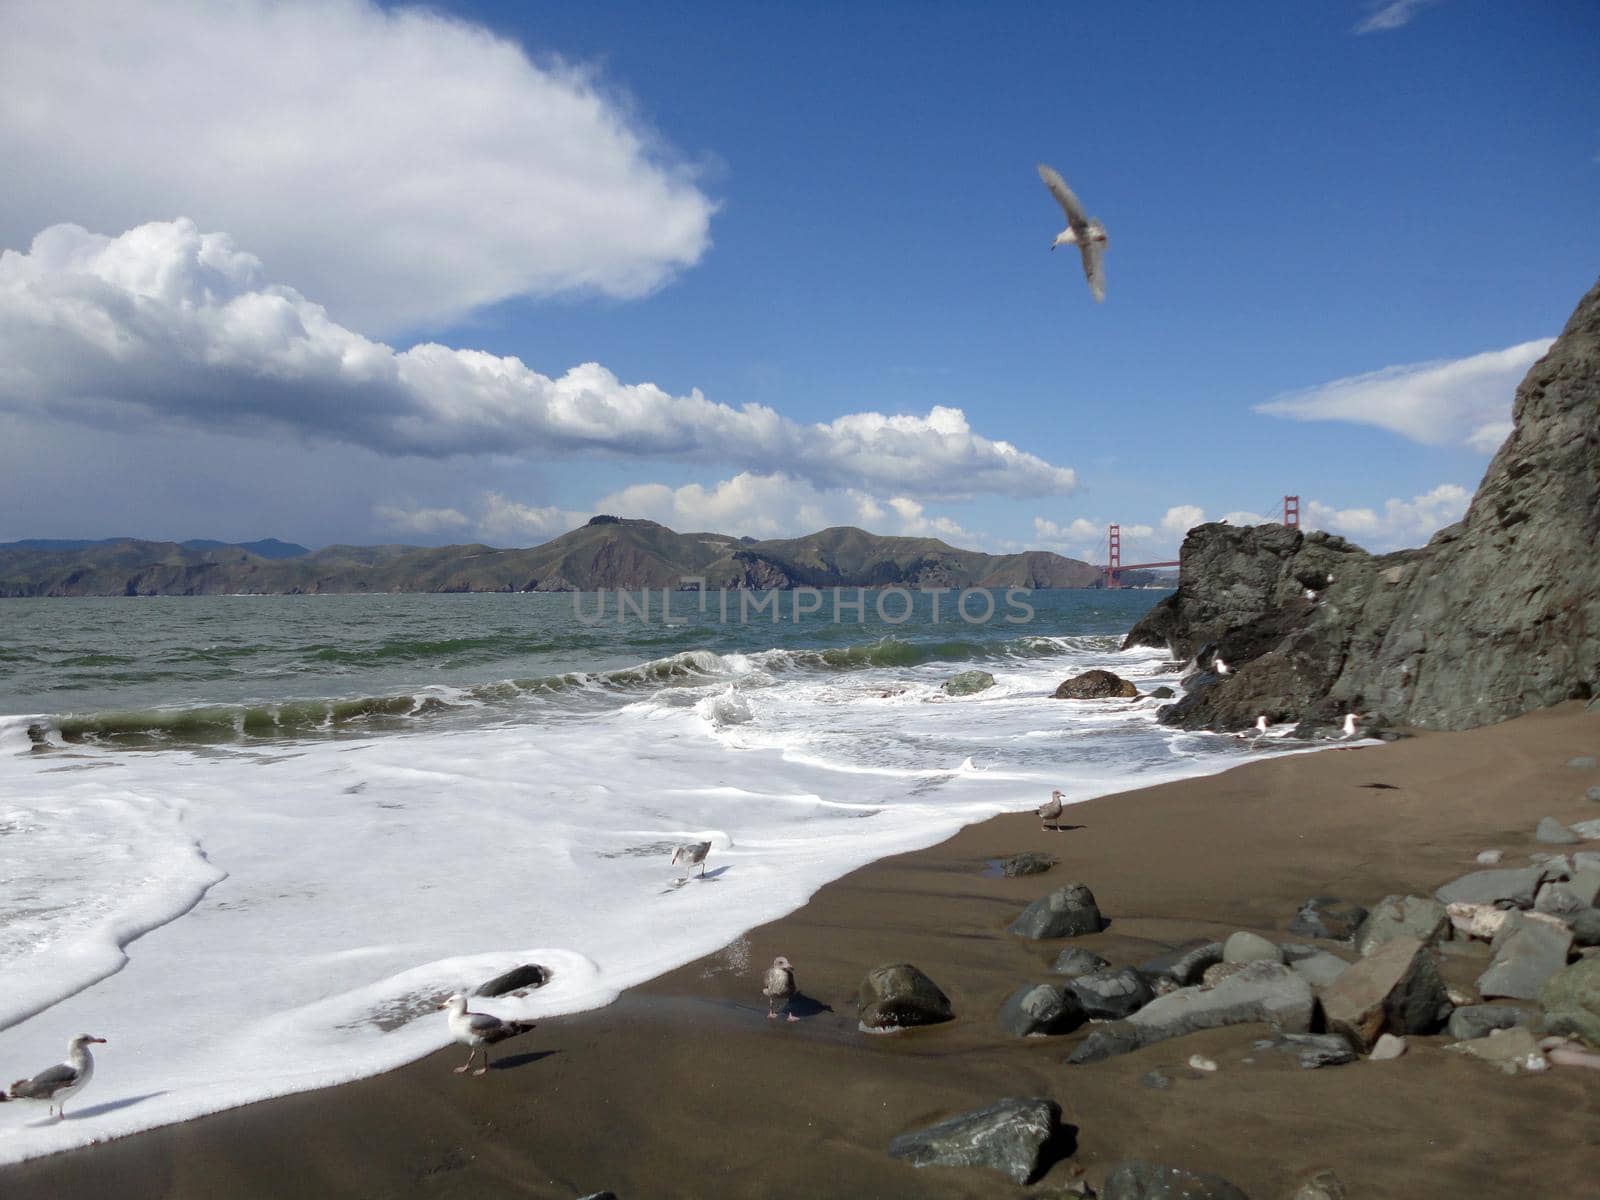 Seagulls on China Beach and in the air with Golden Gate Bridge in the distances in San Francisco, California.